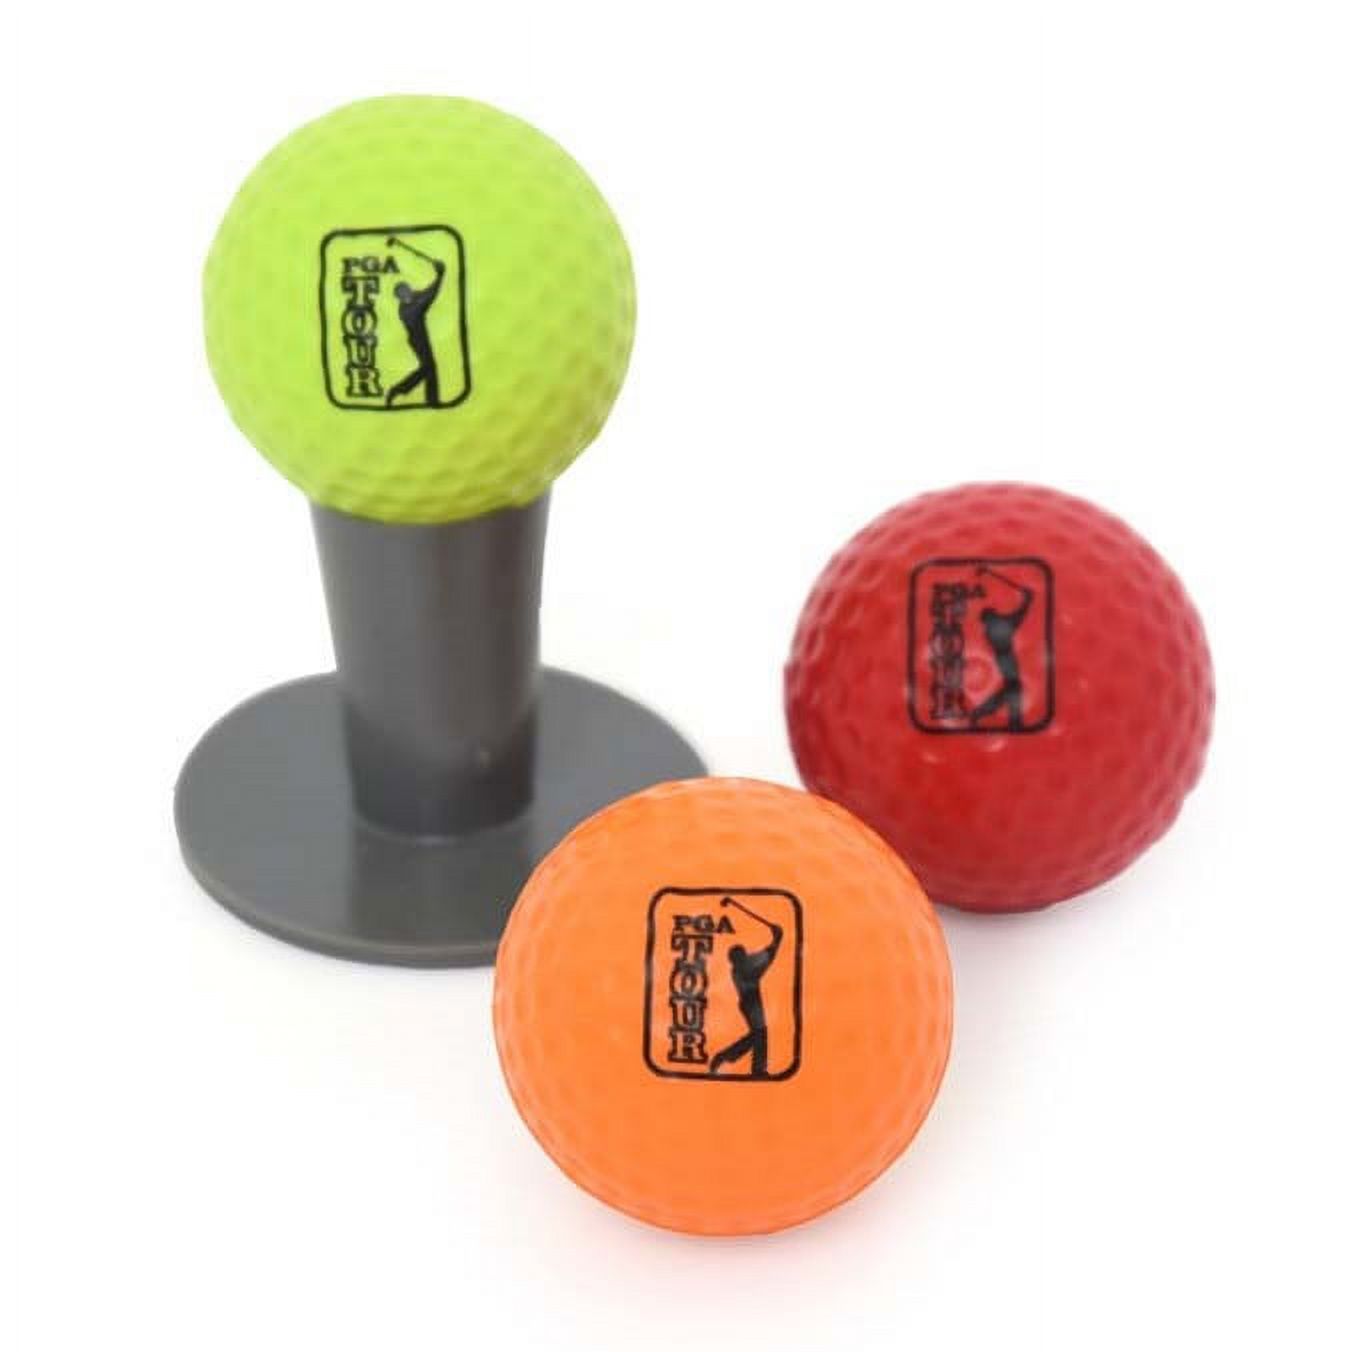 PGA Tour Tee-Up Kids Golf Rubber Tees, 3pack, Black 1.5" Height, 2" Length - image 5 of 11